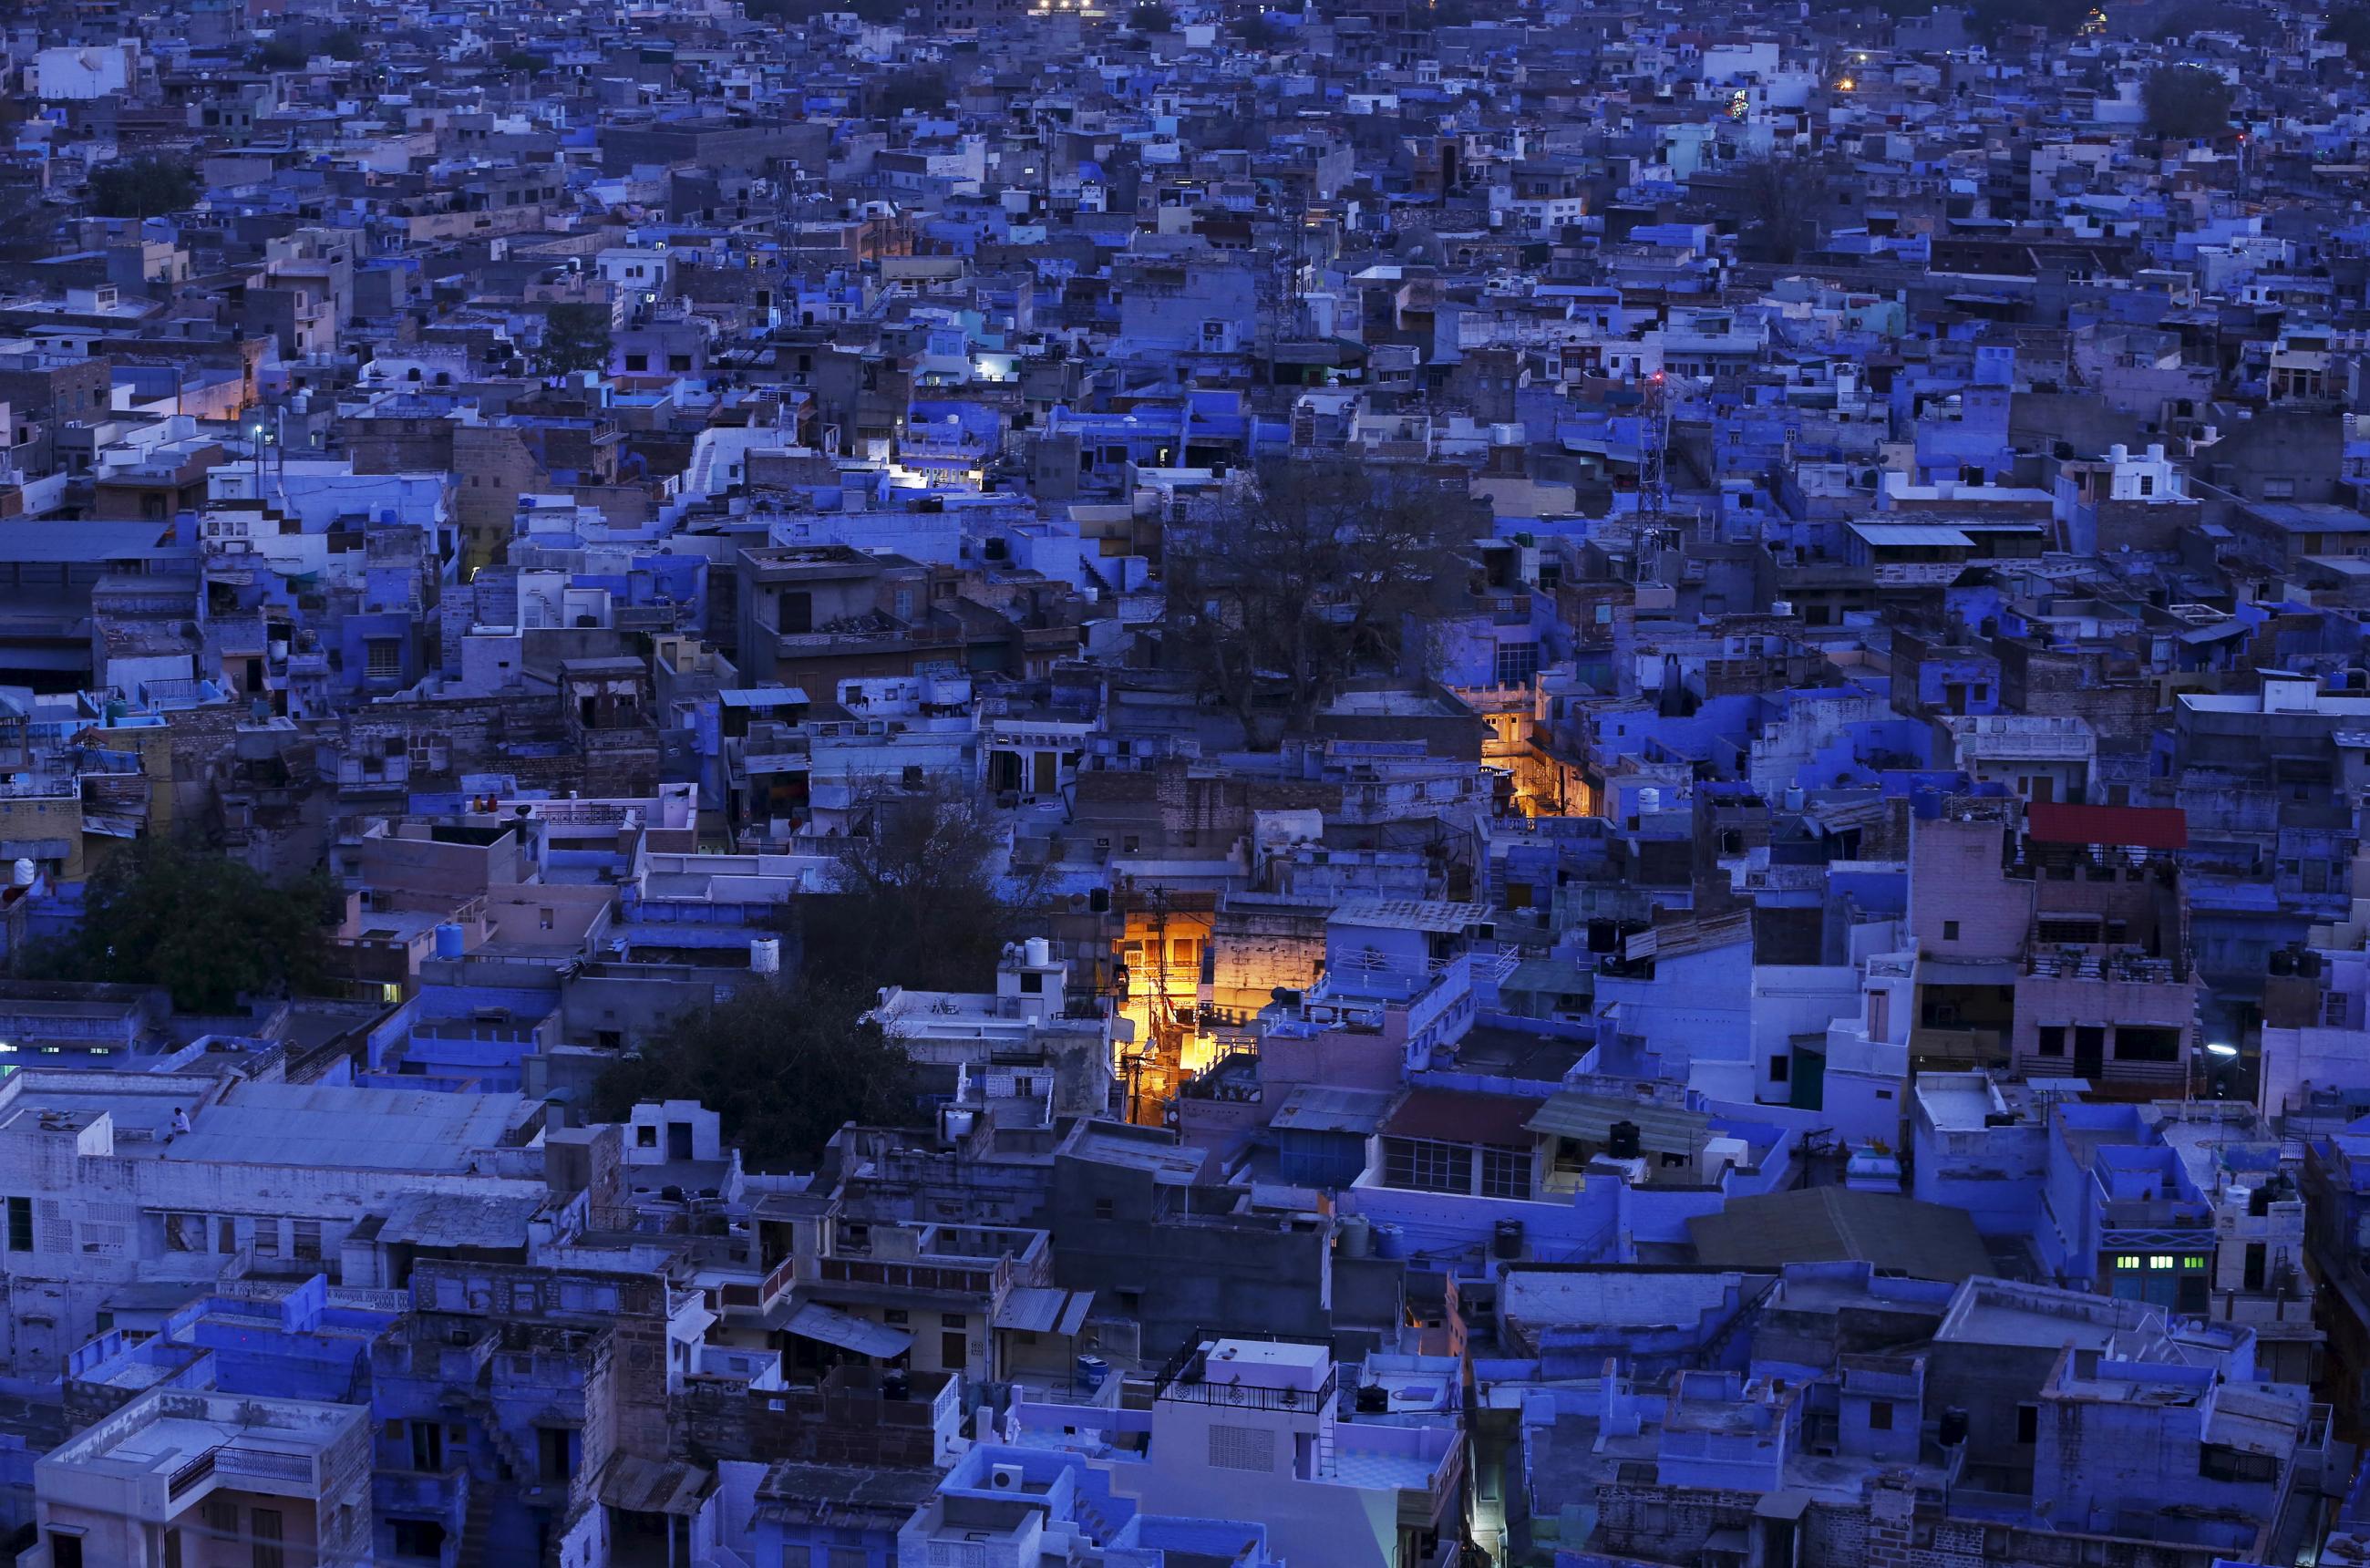 An aerial view of a residential area is pictured during dusk at Jodhpur, India on April 5, 2015. All the buildings are painted blue to help keep buildings cool. Two places in the city are lit by bright yellow lights.